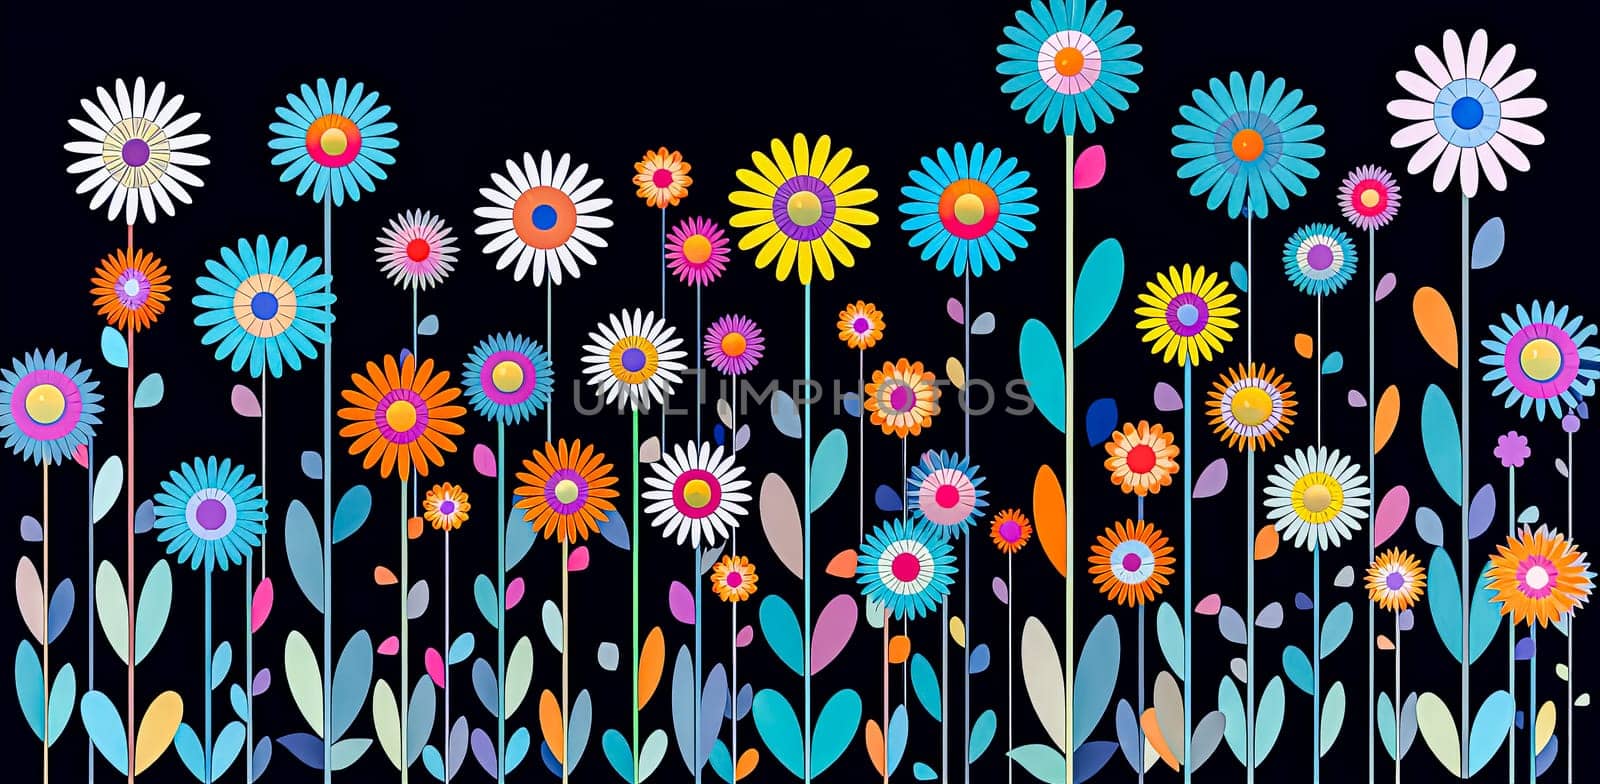 Set of minimalistic beautiful garden and field flowers isolated on black background. Versatile collection perfect for various design projects.